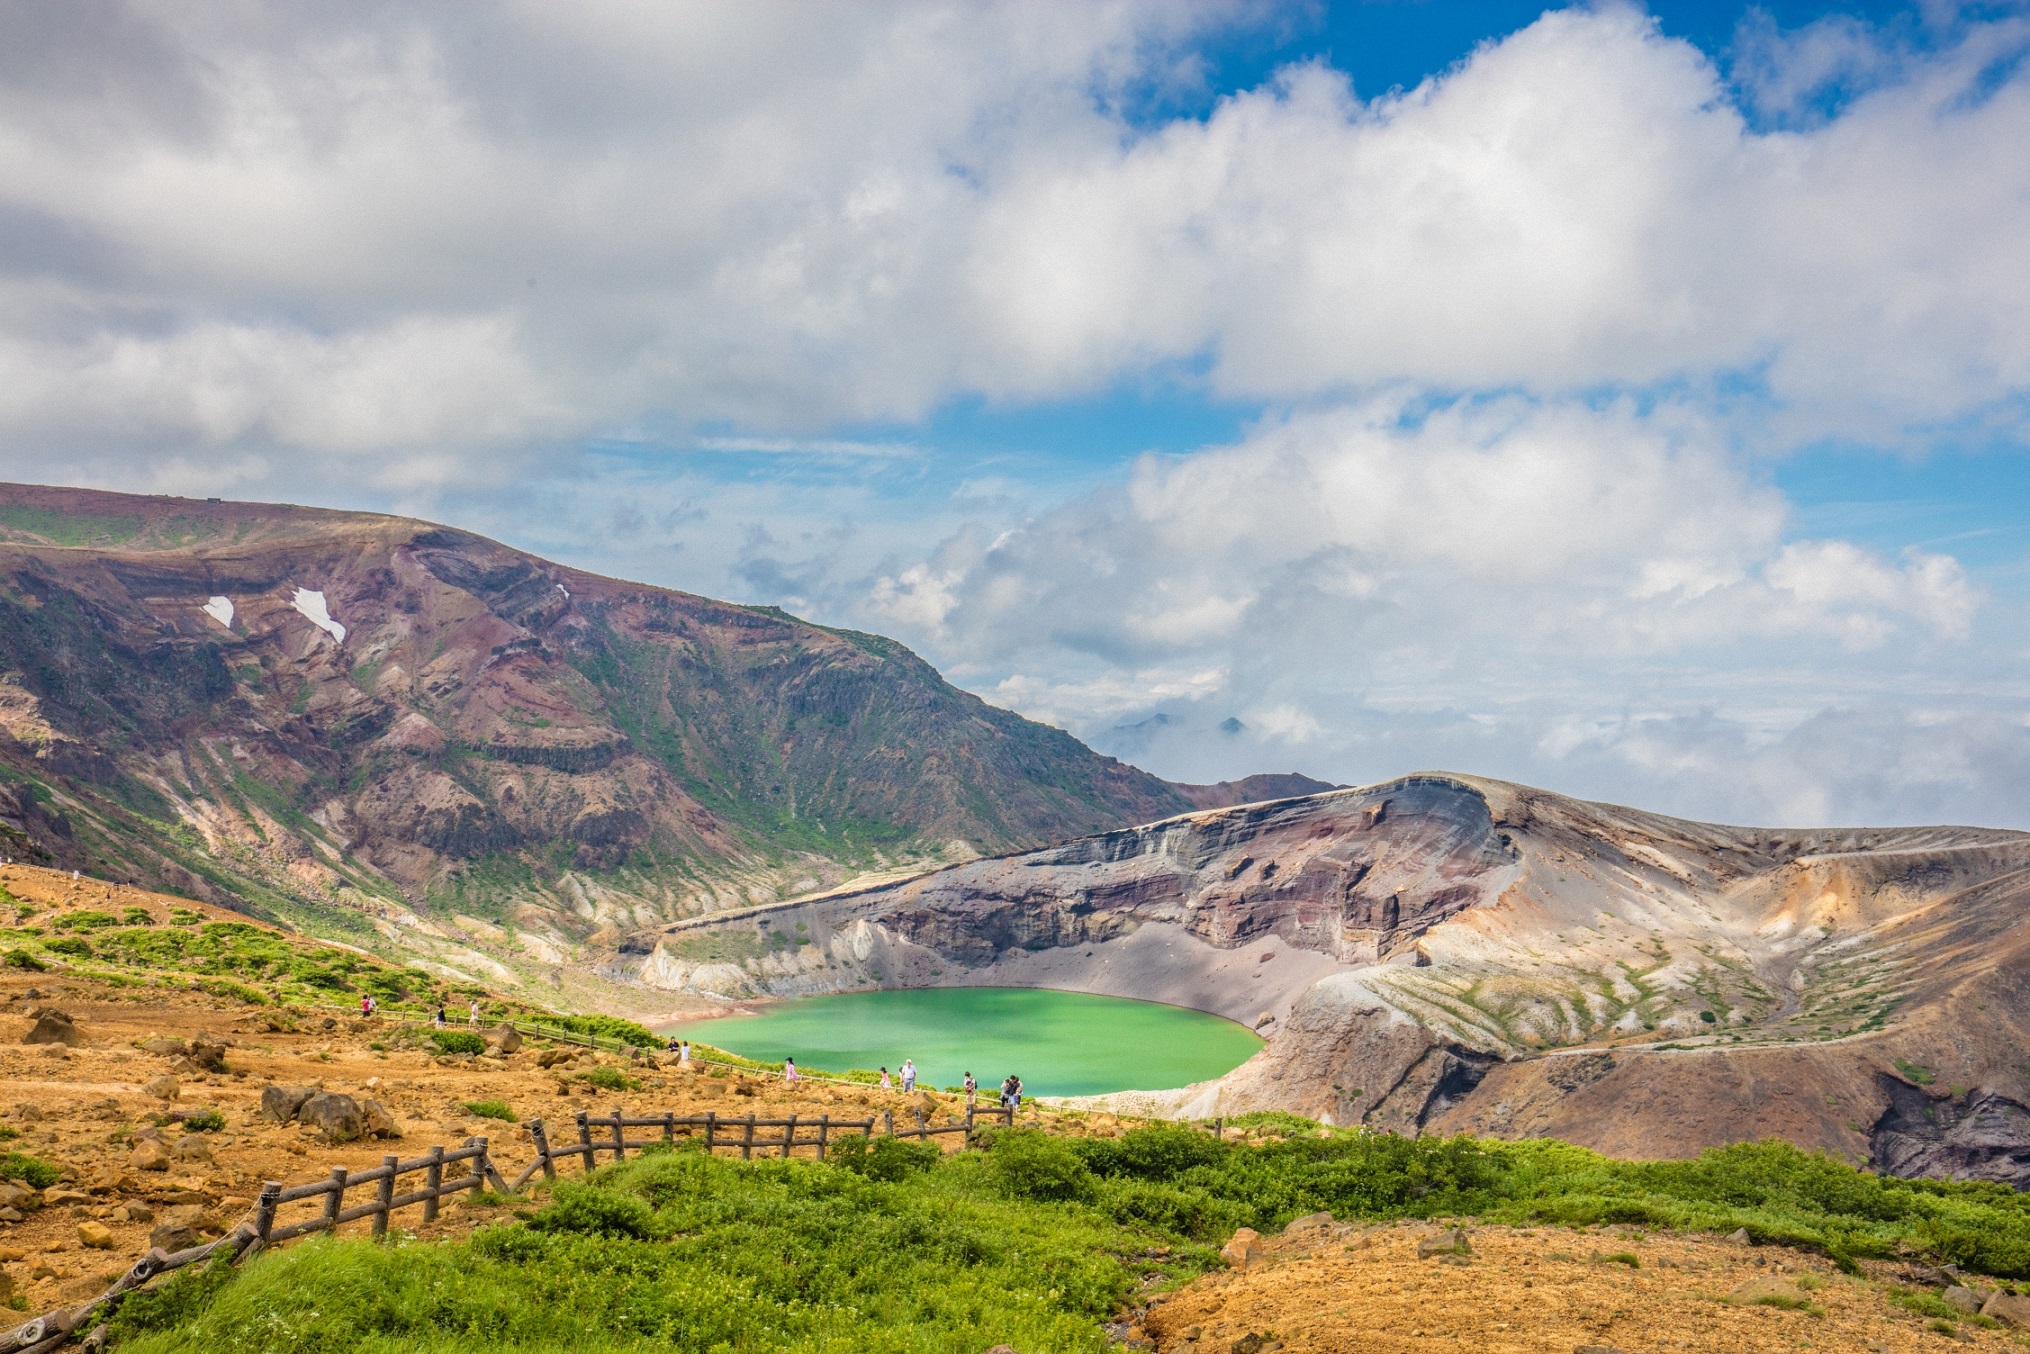 【Okama】The most beautiful scenery in Zao Town! -A mythical crater lake shining in emerald green